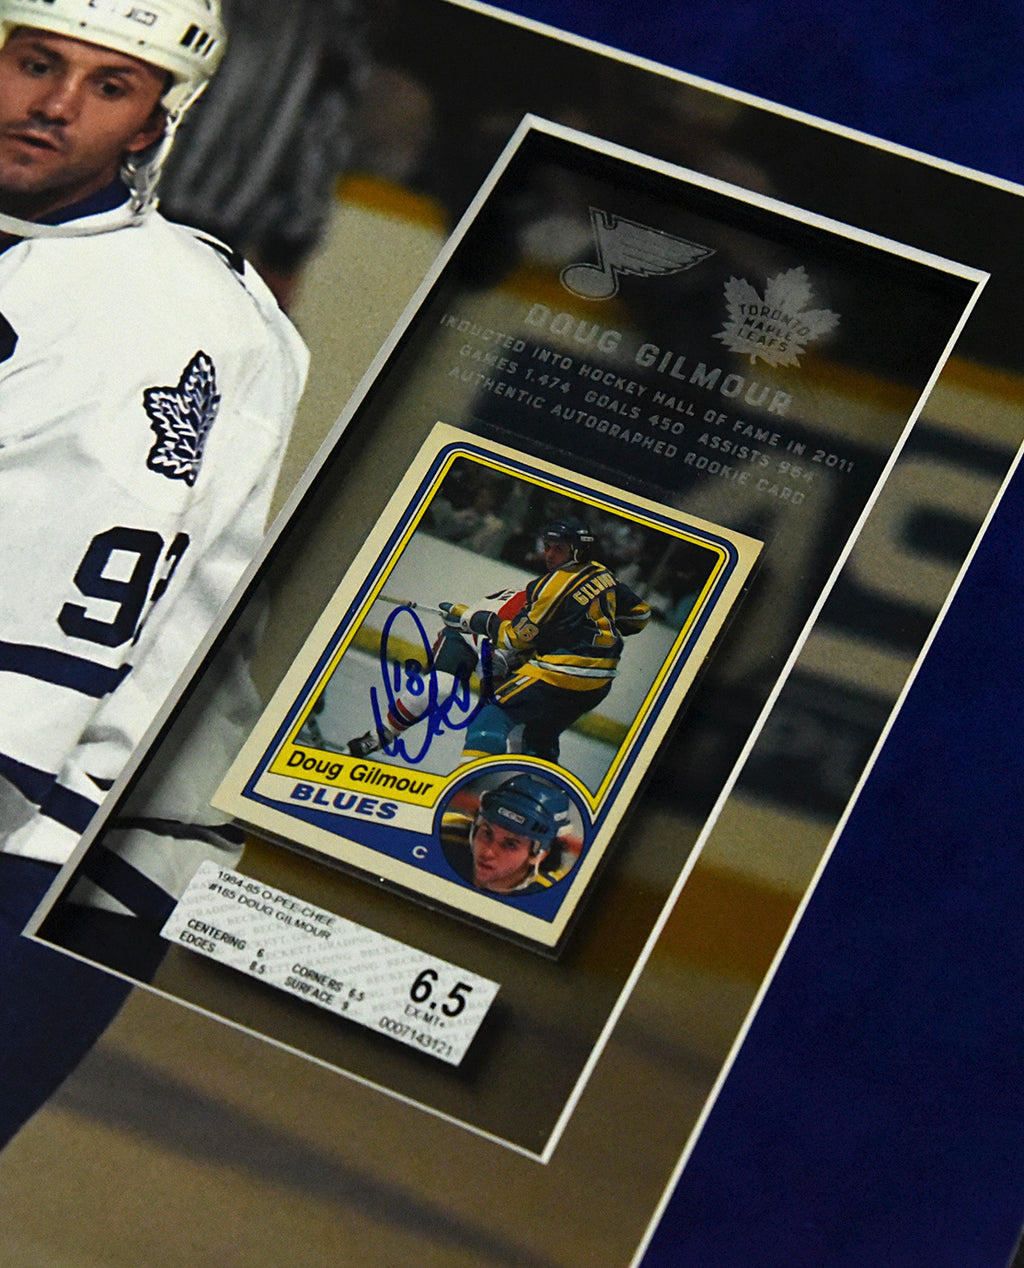 DOUG GILMOUR autographed "Rookie Card" 16x20 display